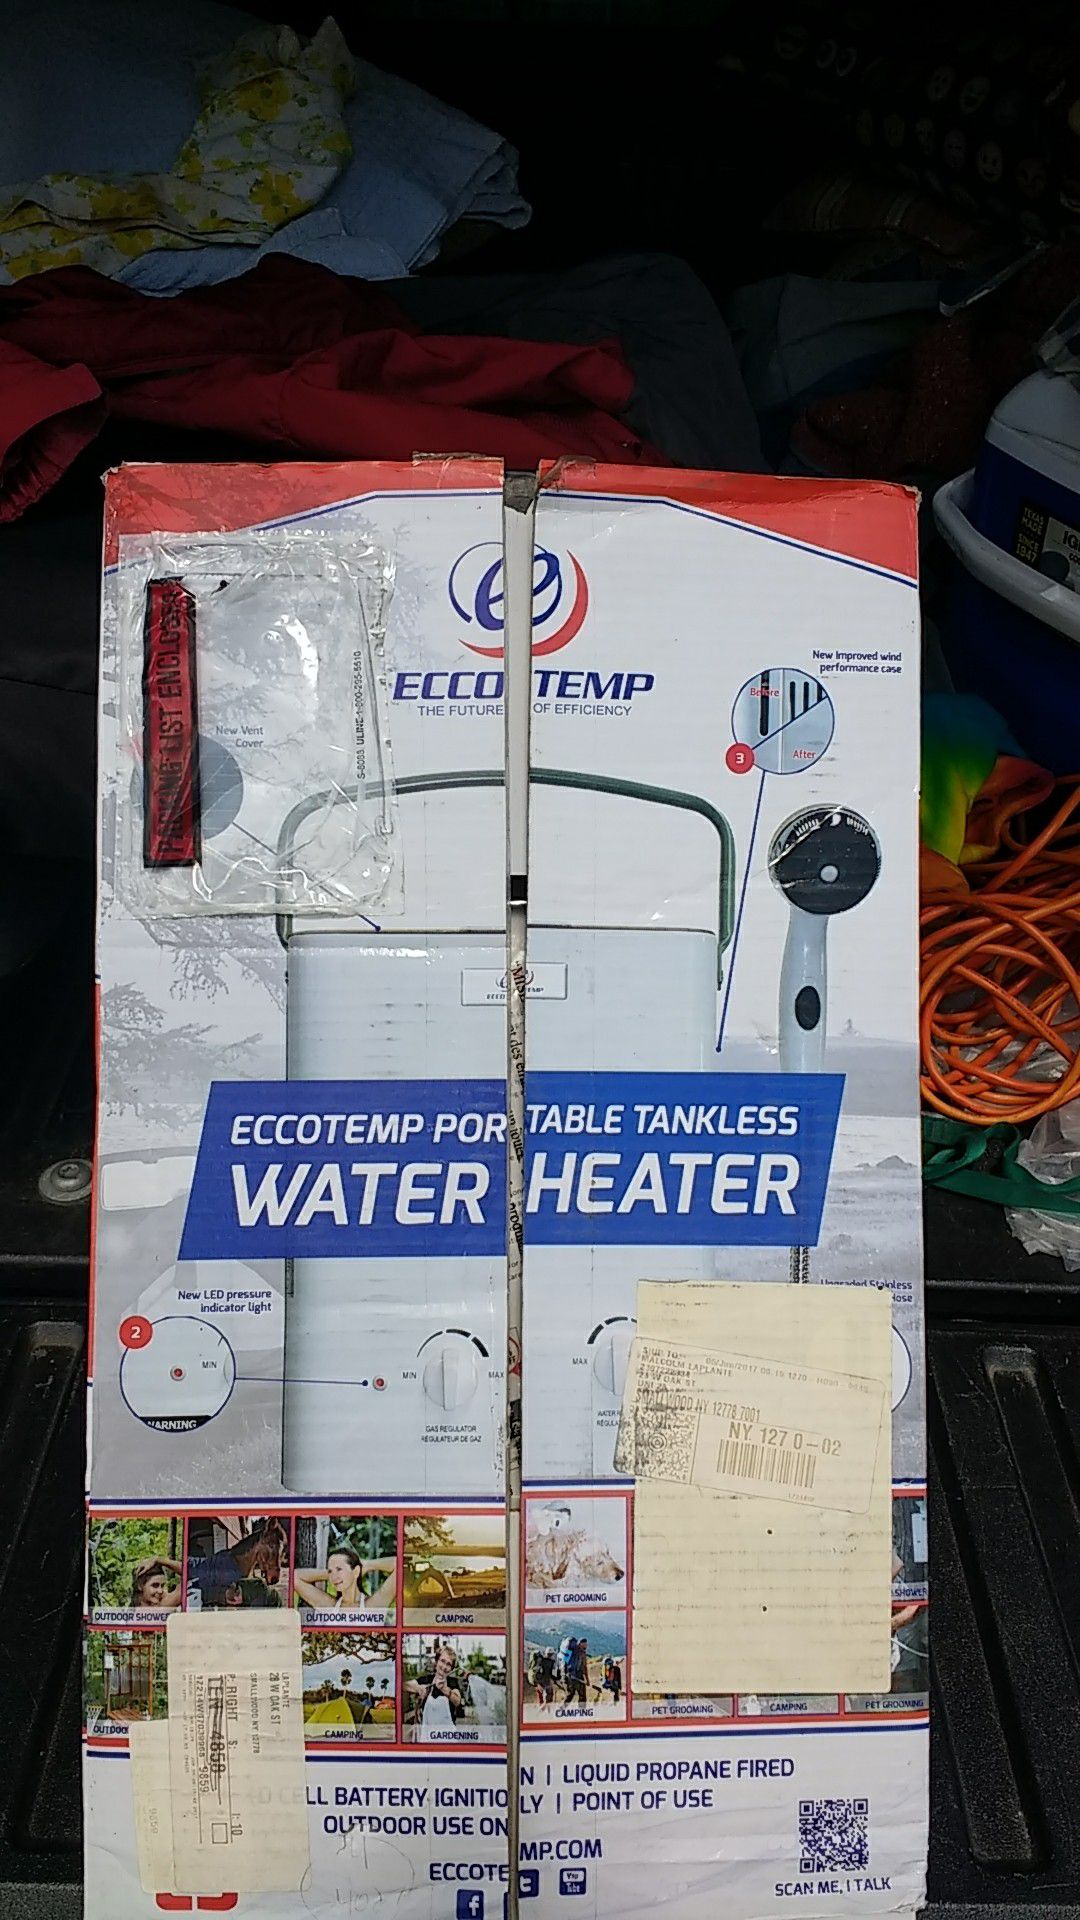 Ecotemp portable tankless water heater